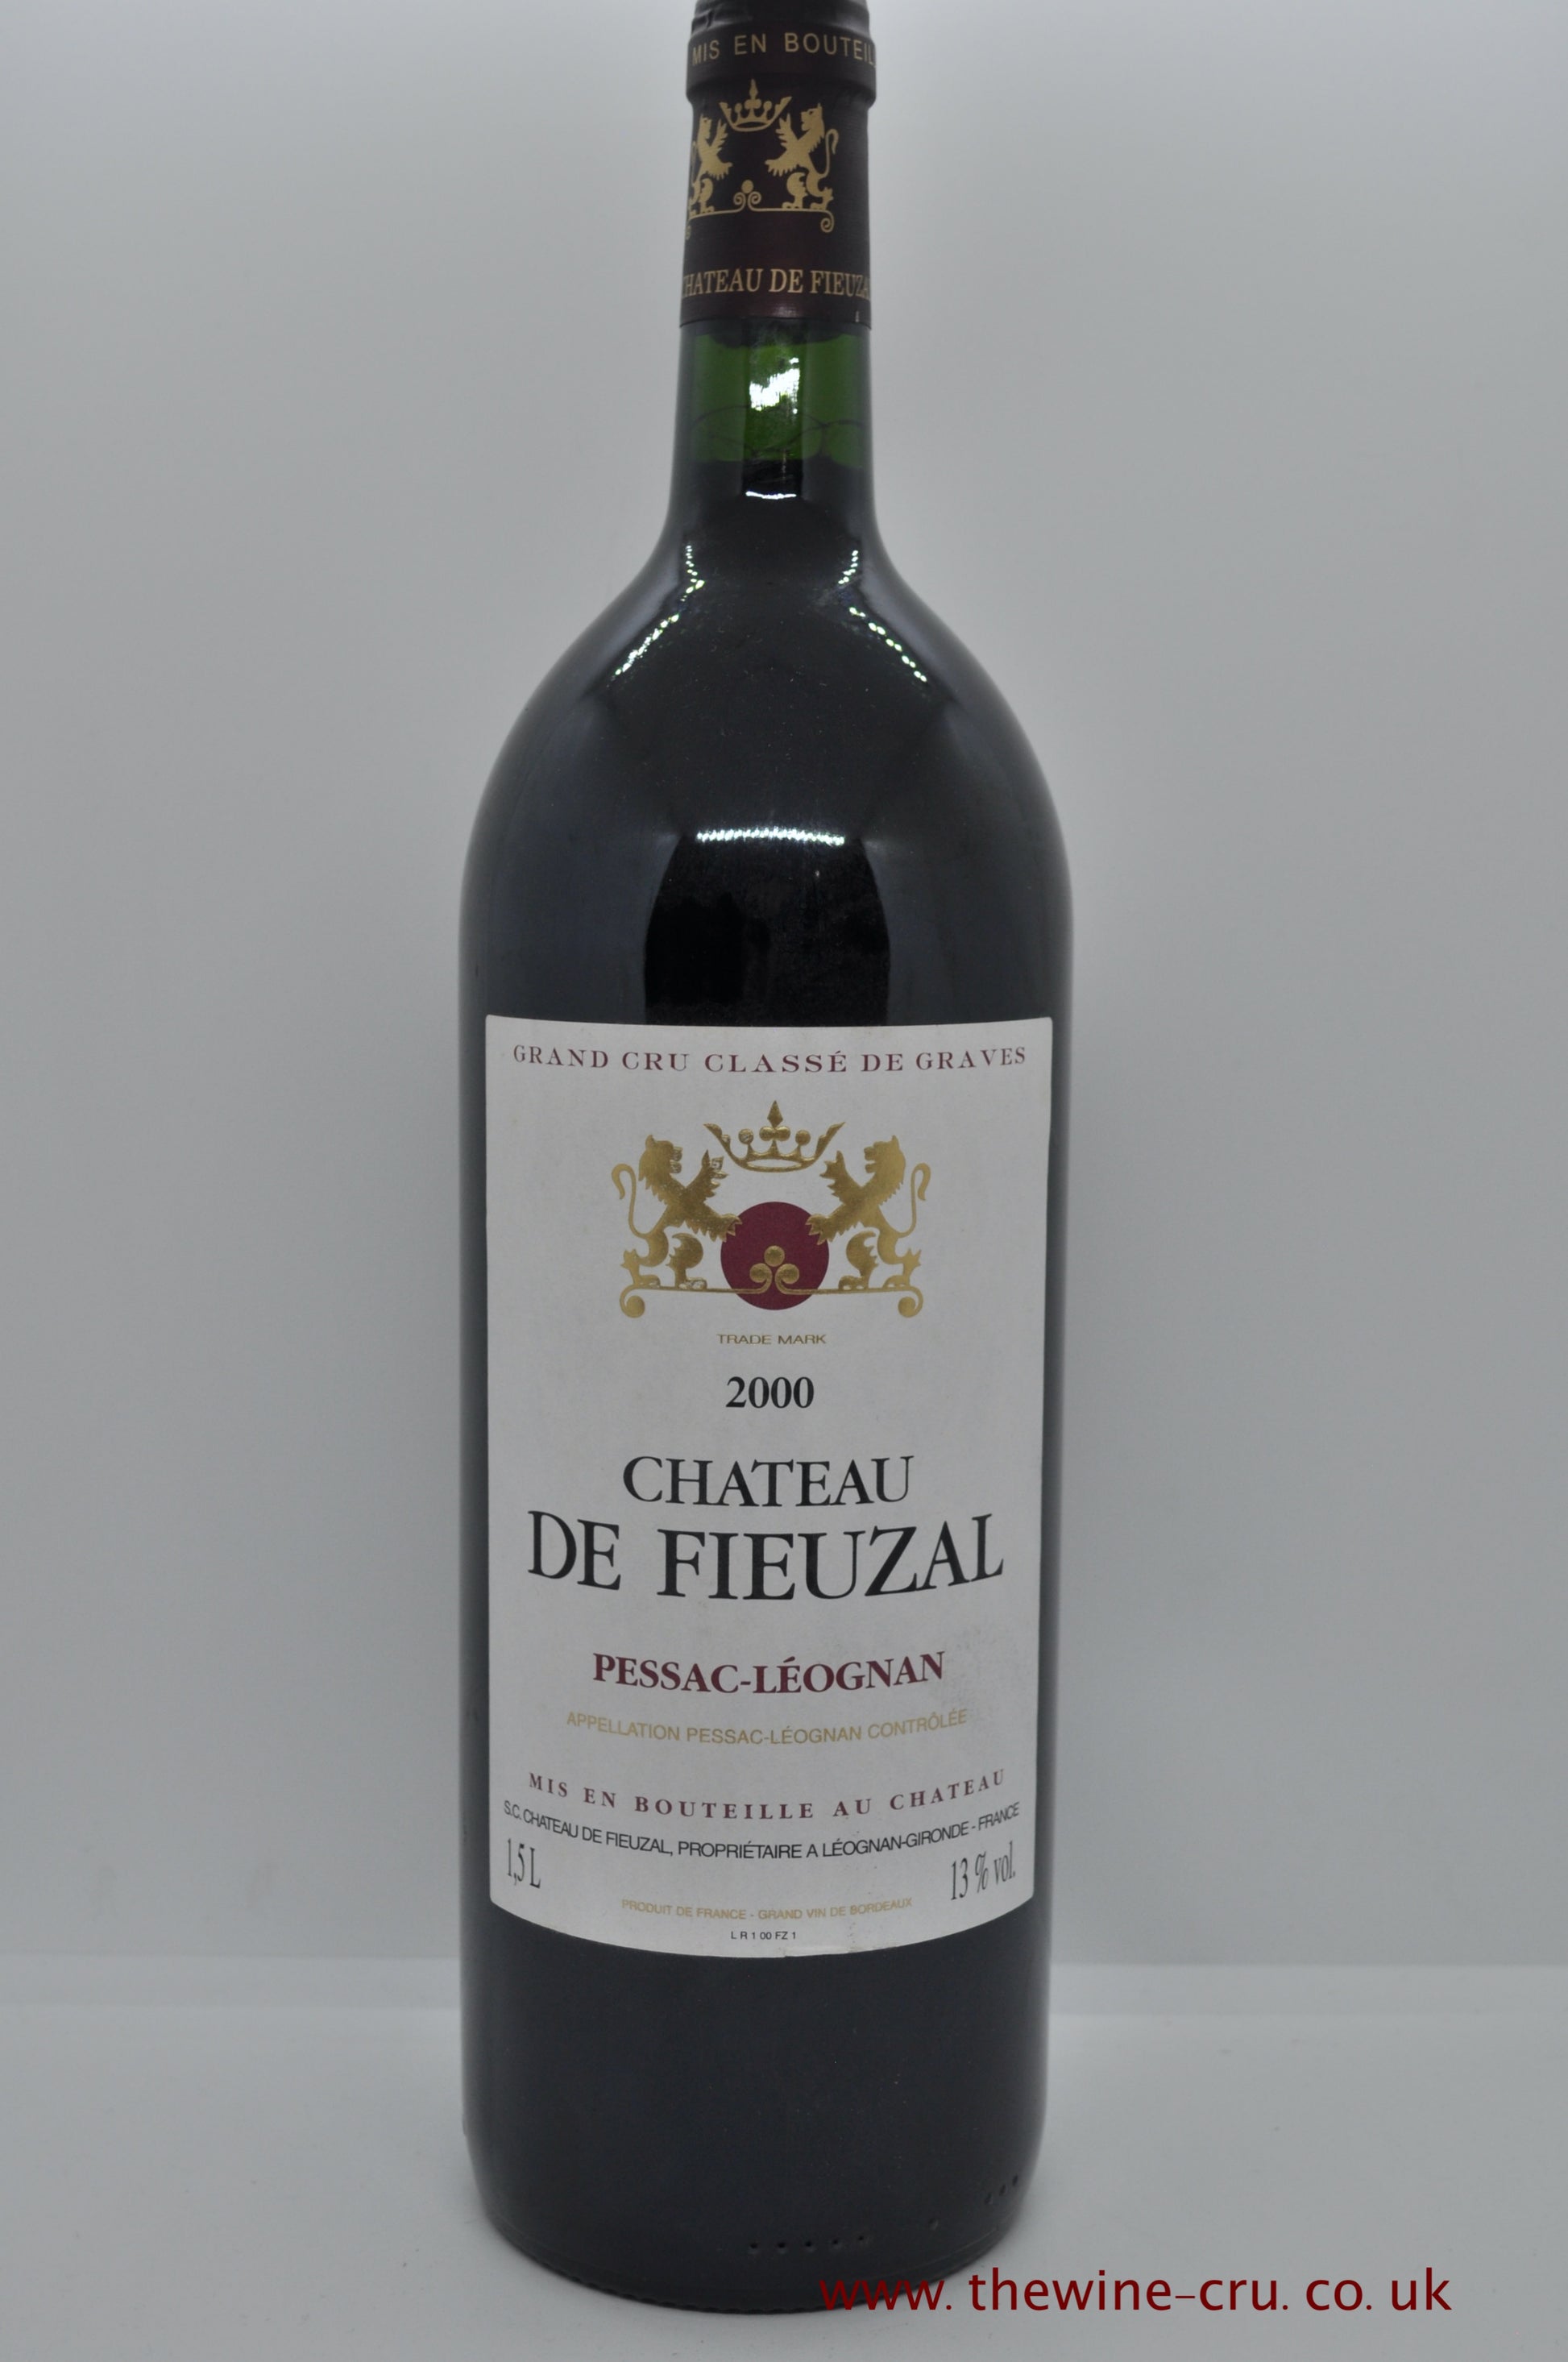 A magnum bottle of 2000 vintage red wine fro Chateau De Fieuzal, France, Bordeaux. Capsule and label are good and the wine level is at the base of the neck. Immediate delivery. Free local delivery. Gift wrapping available.